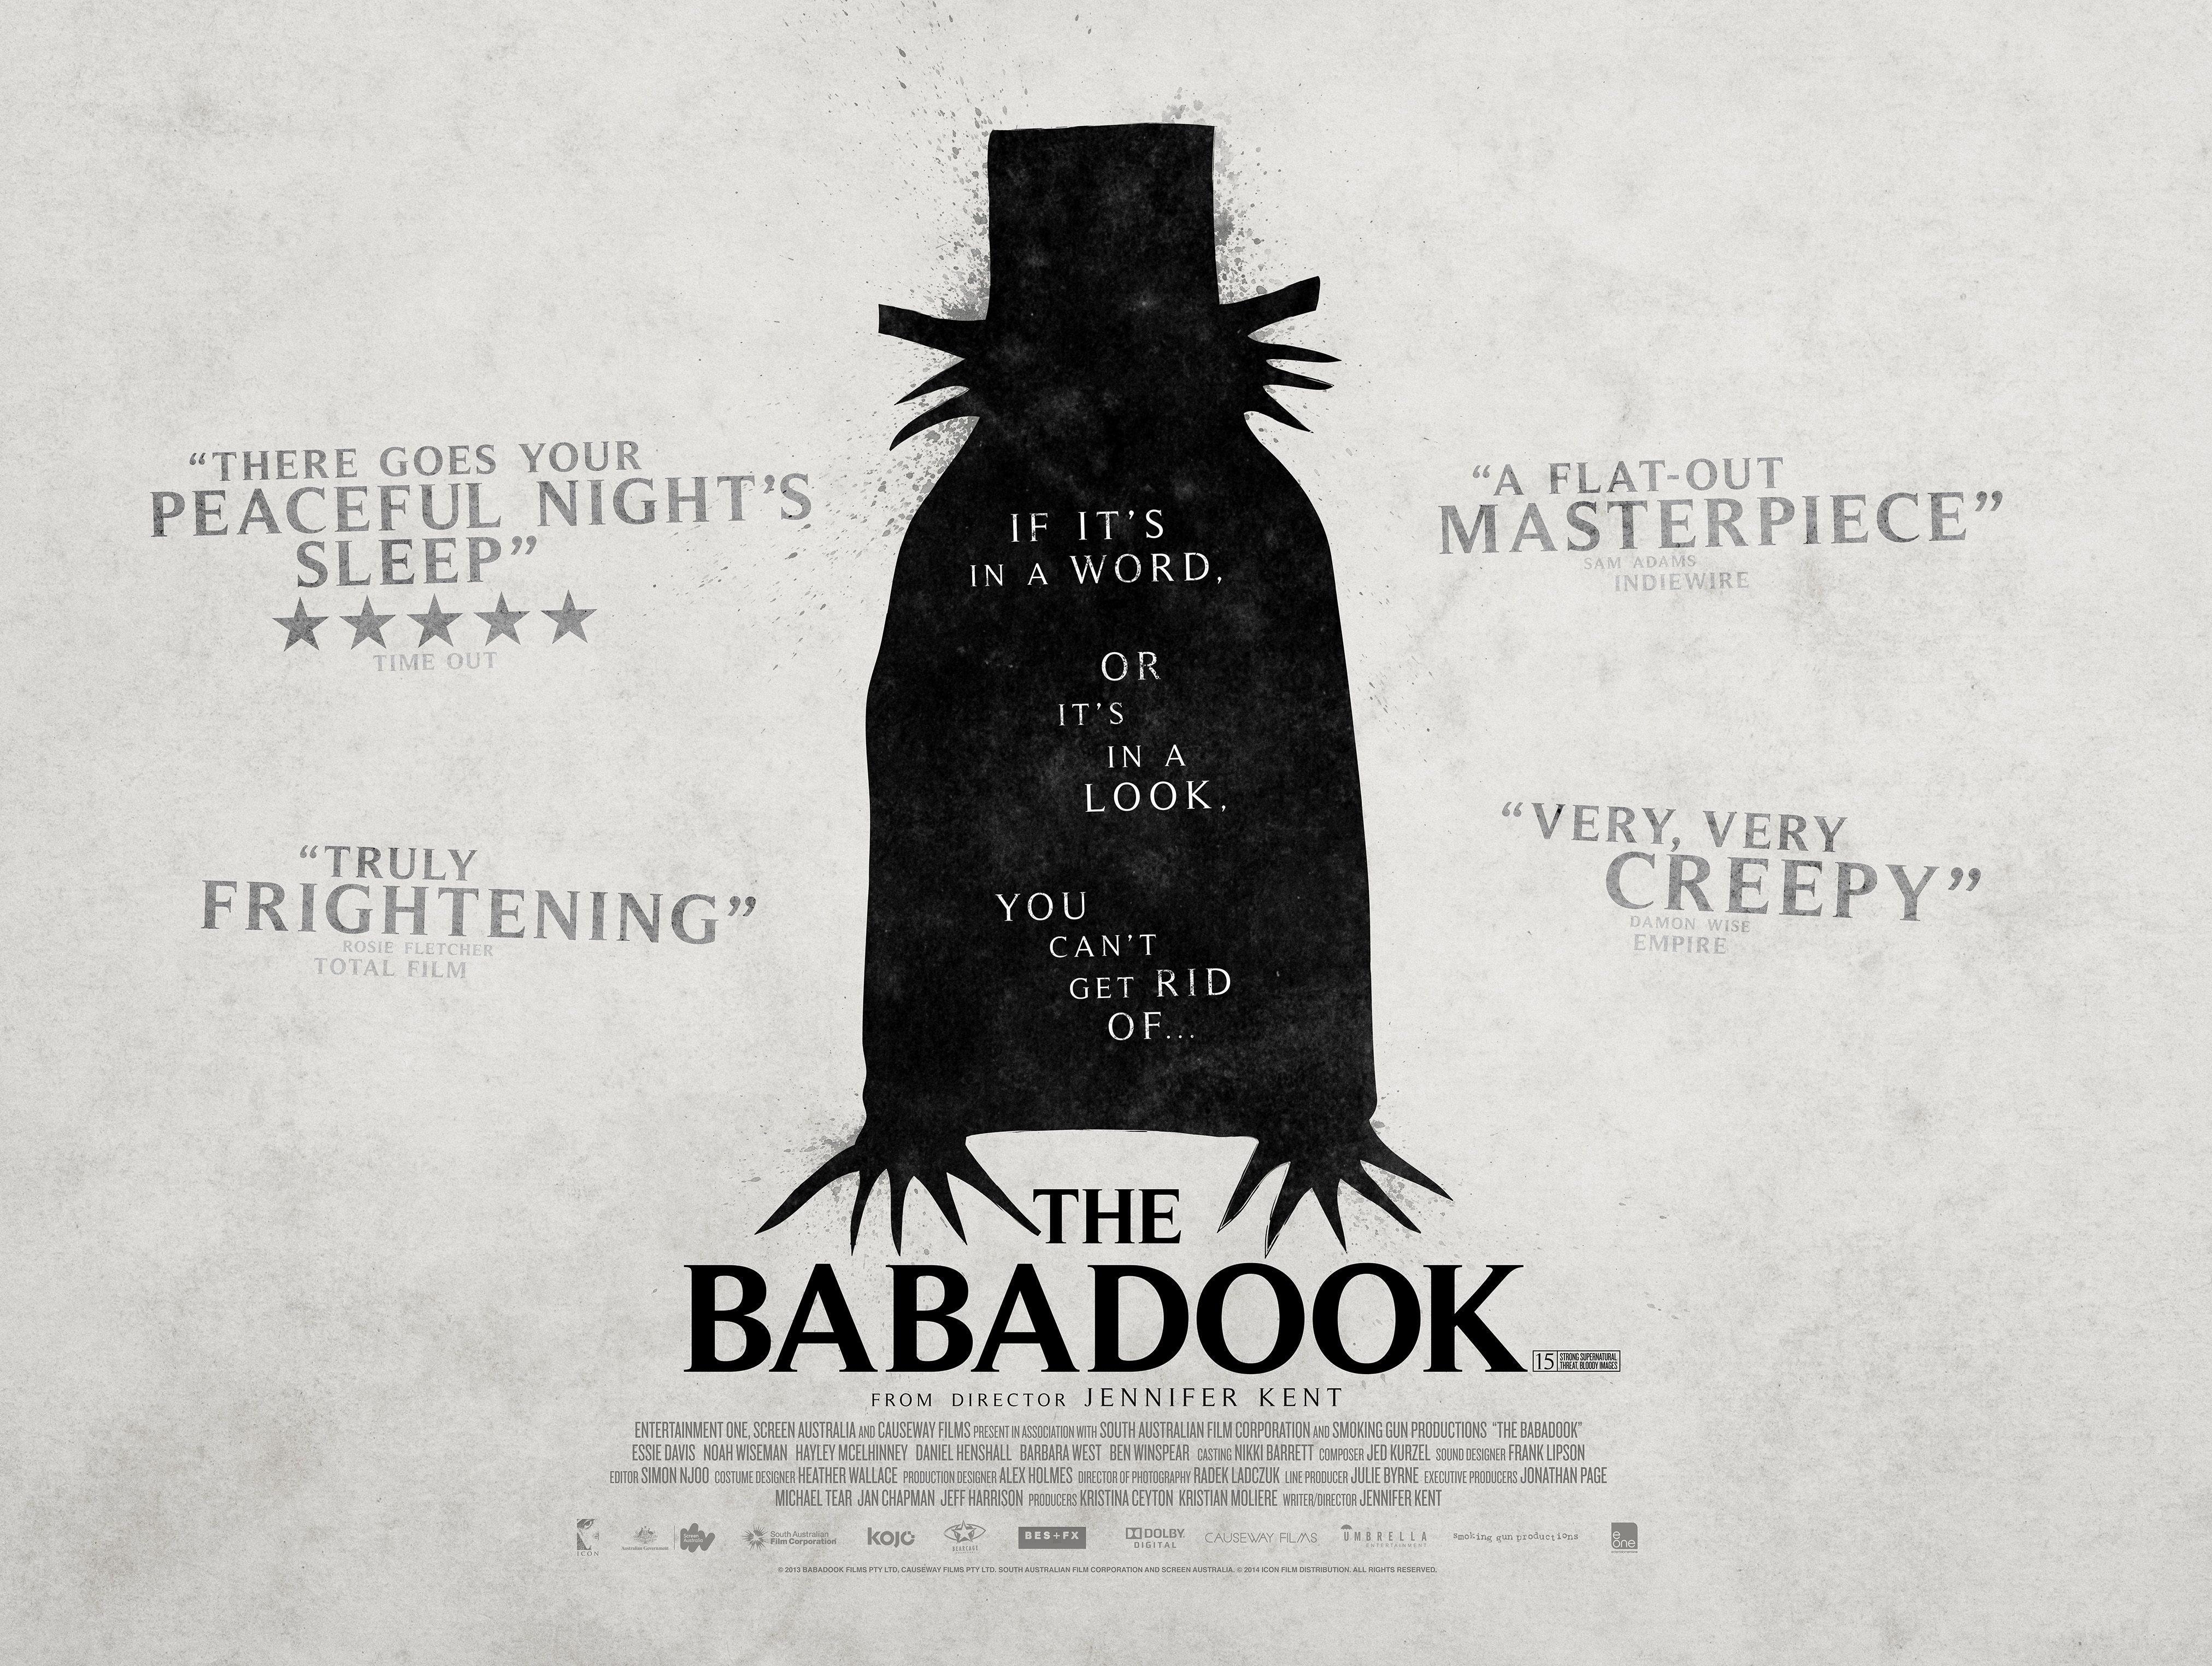 The Babadook 4k Ultra HD Wallpaper. Background Imagex3048